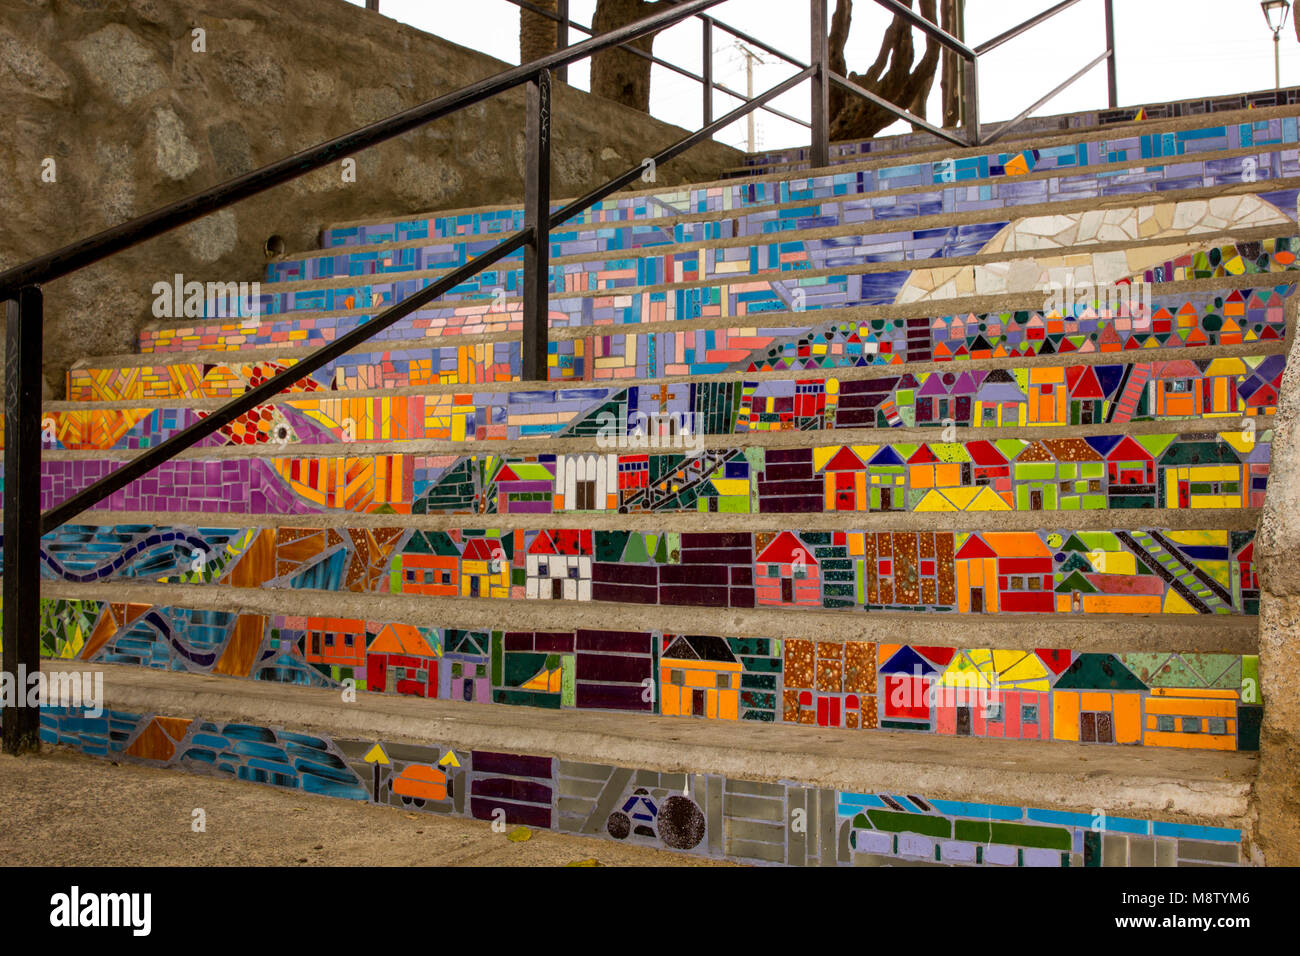 Colorful mosaic steps that replicate the cities hillside community lead to a park in Valparaiso, Chile in South America Stock Photo